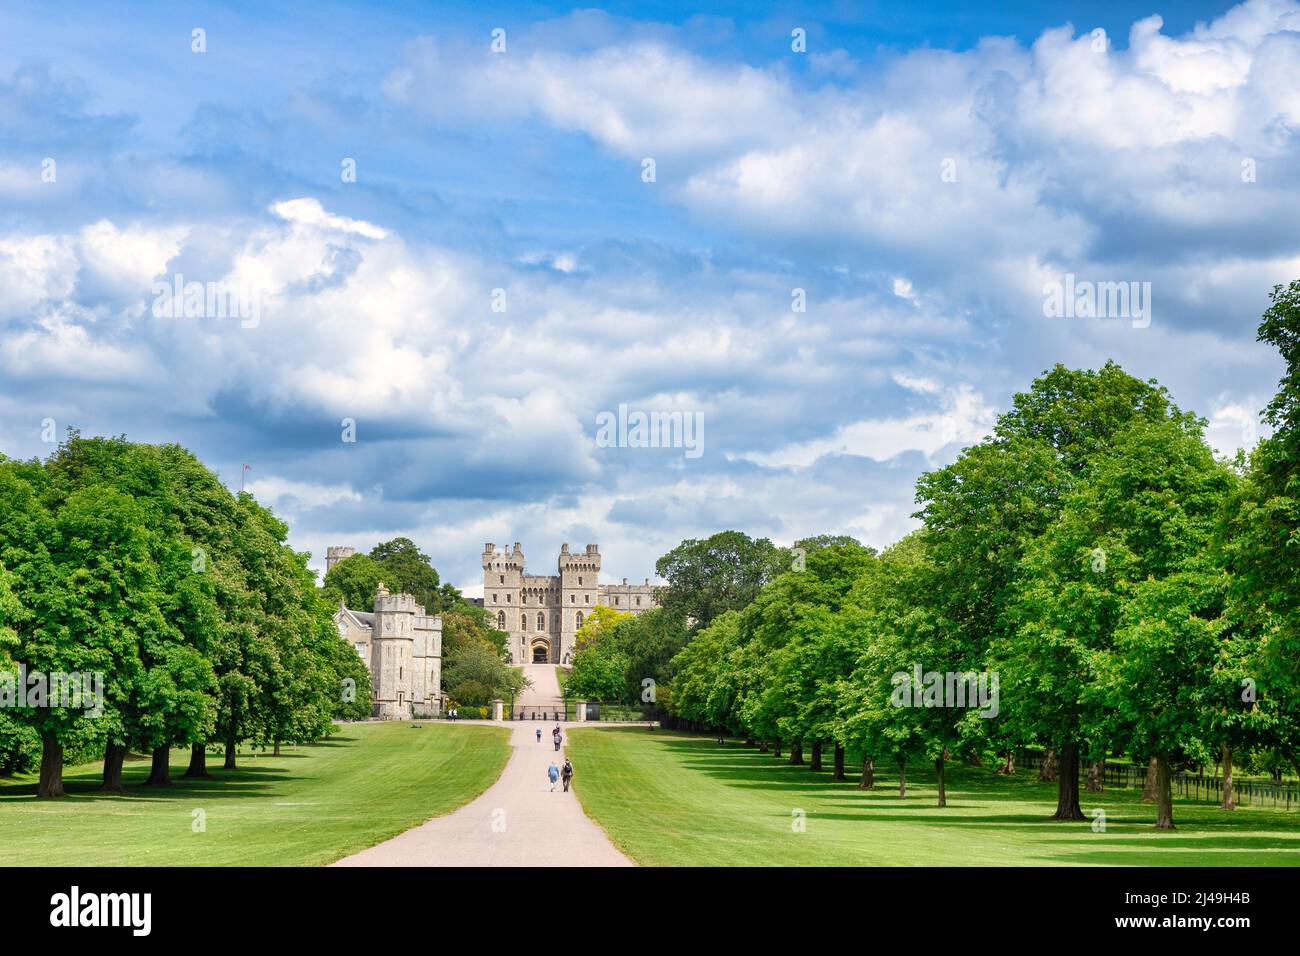 5 June 2019: Windsor, Berkshire, UK - Windsor Castle, home of the British monarch, and the Long Walk, with its avenue of trees in full leaf, people wa Stock Photo